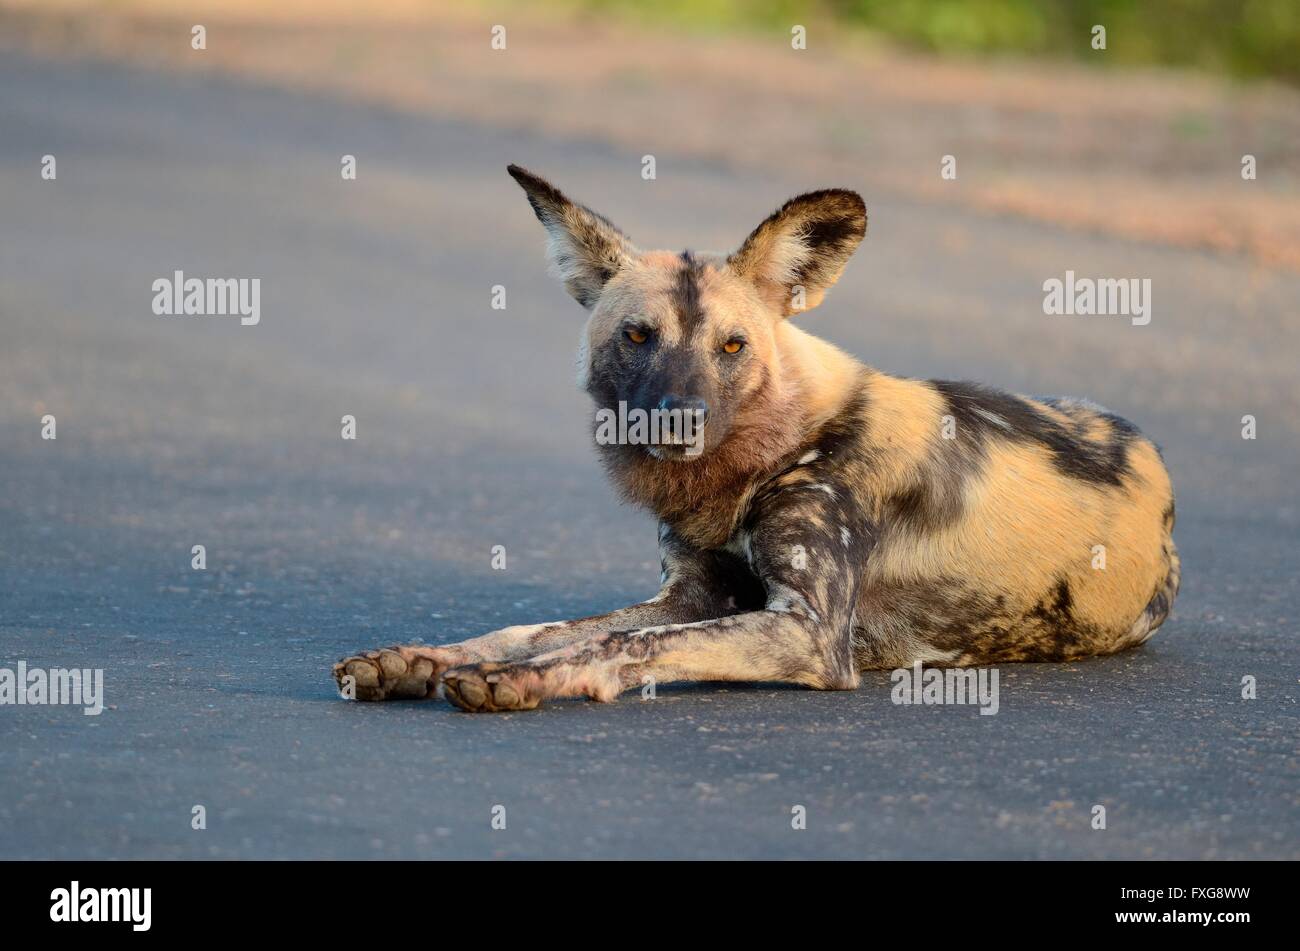 African Wild Dog, African Hunting Dog or African Painted Dog (Lycaon pictus), lying on a road, alert, Kruger National Park Stock Photo